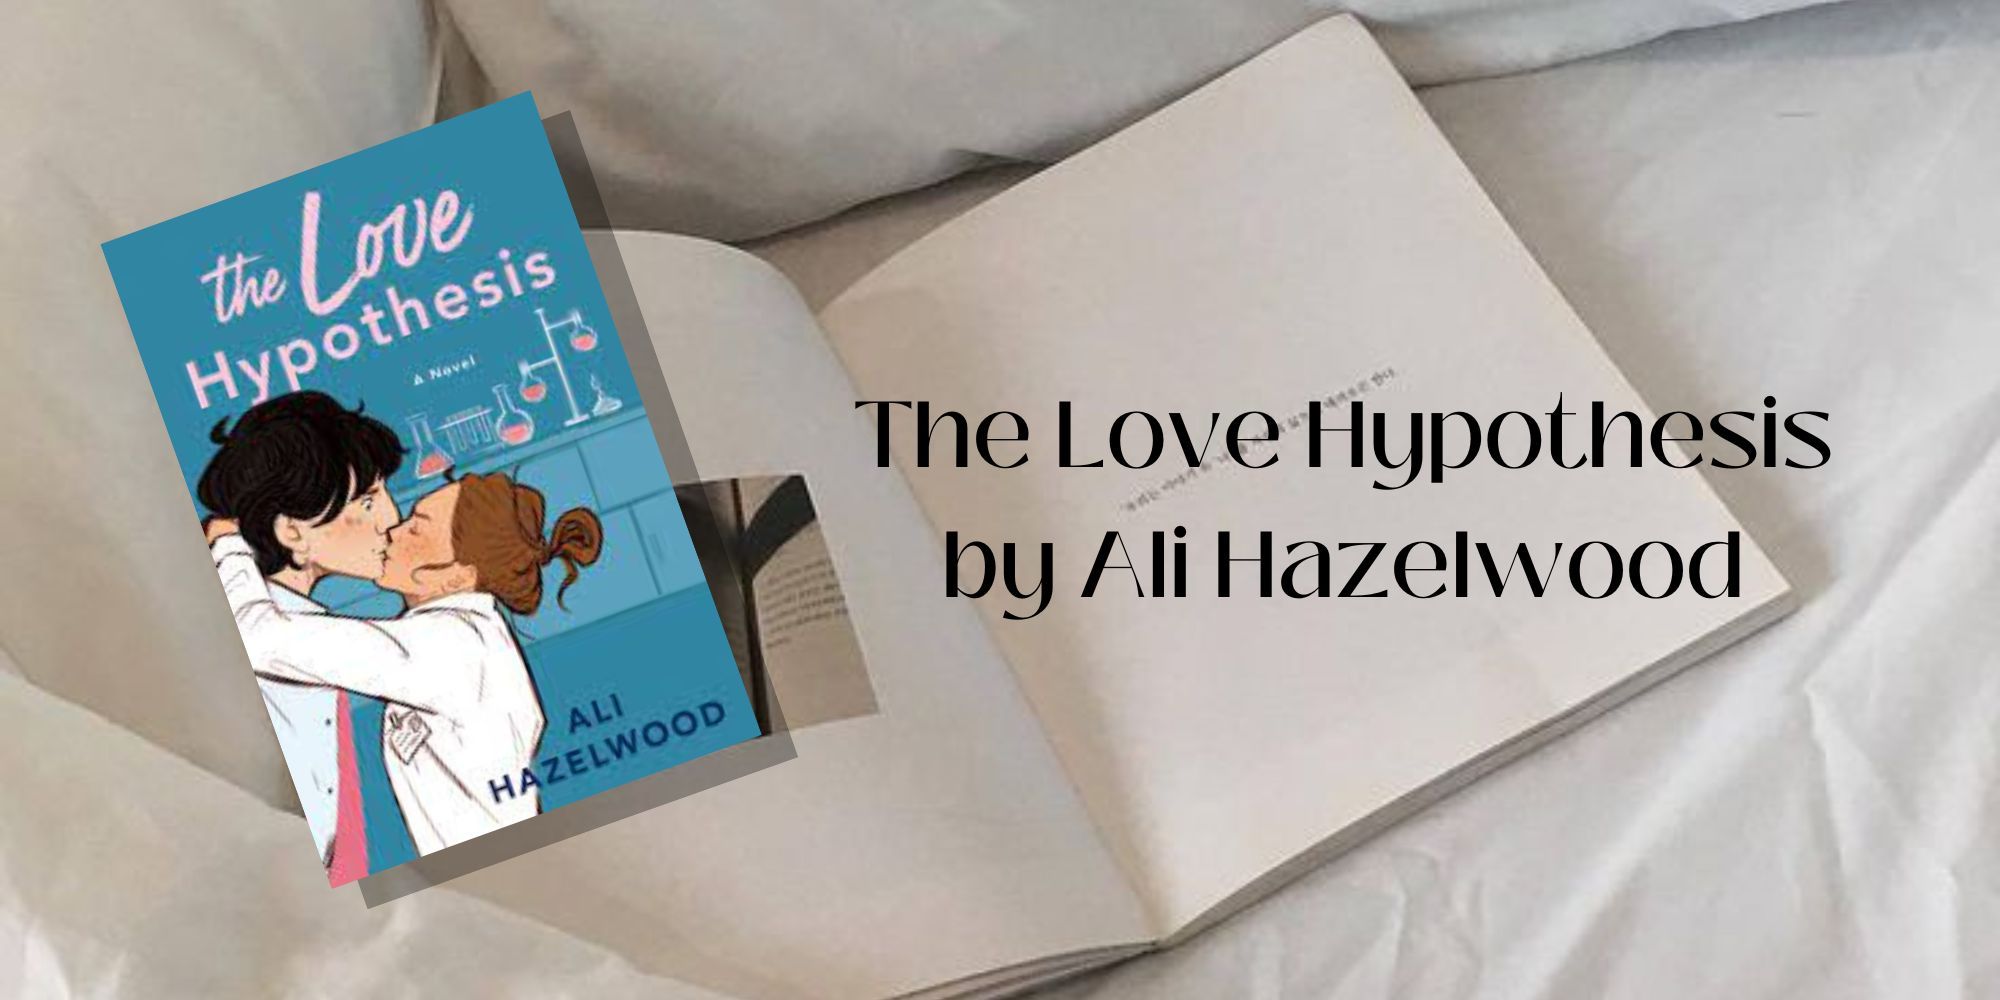 The cover of The Love Hypothesis by Ali Hazelwood